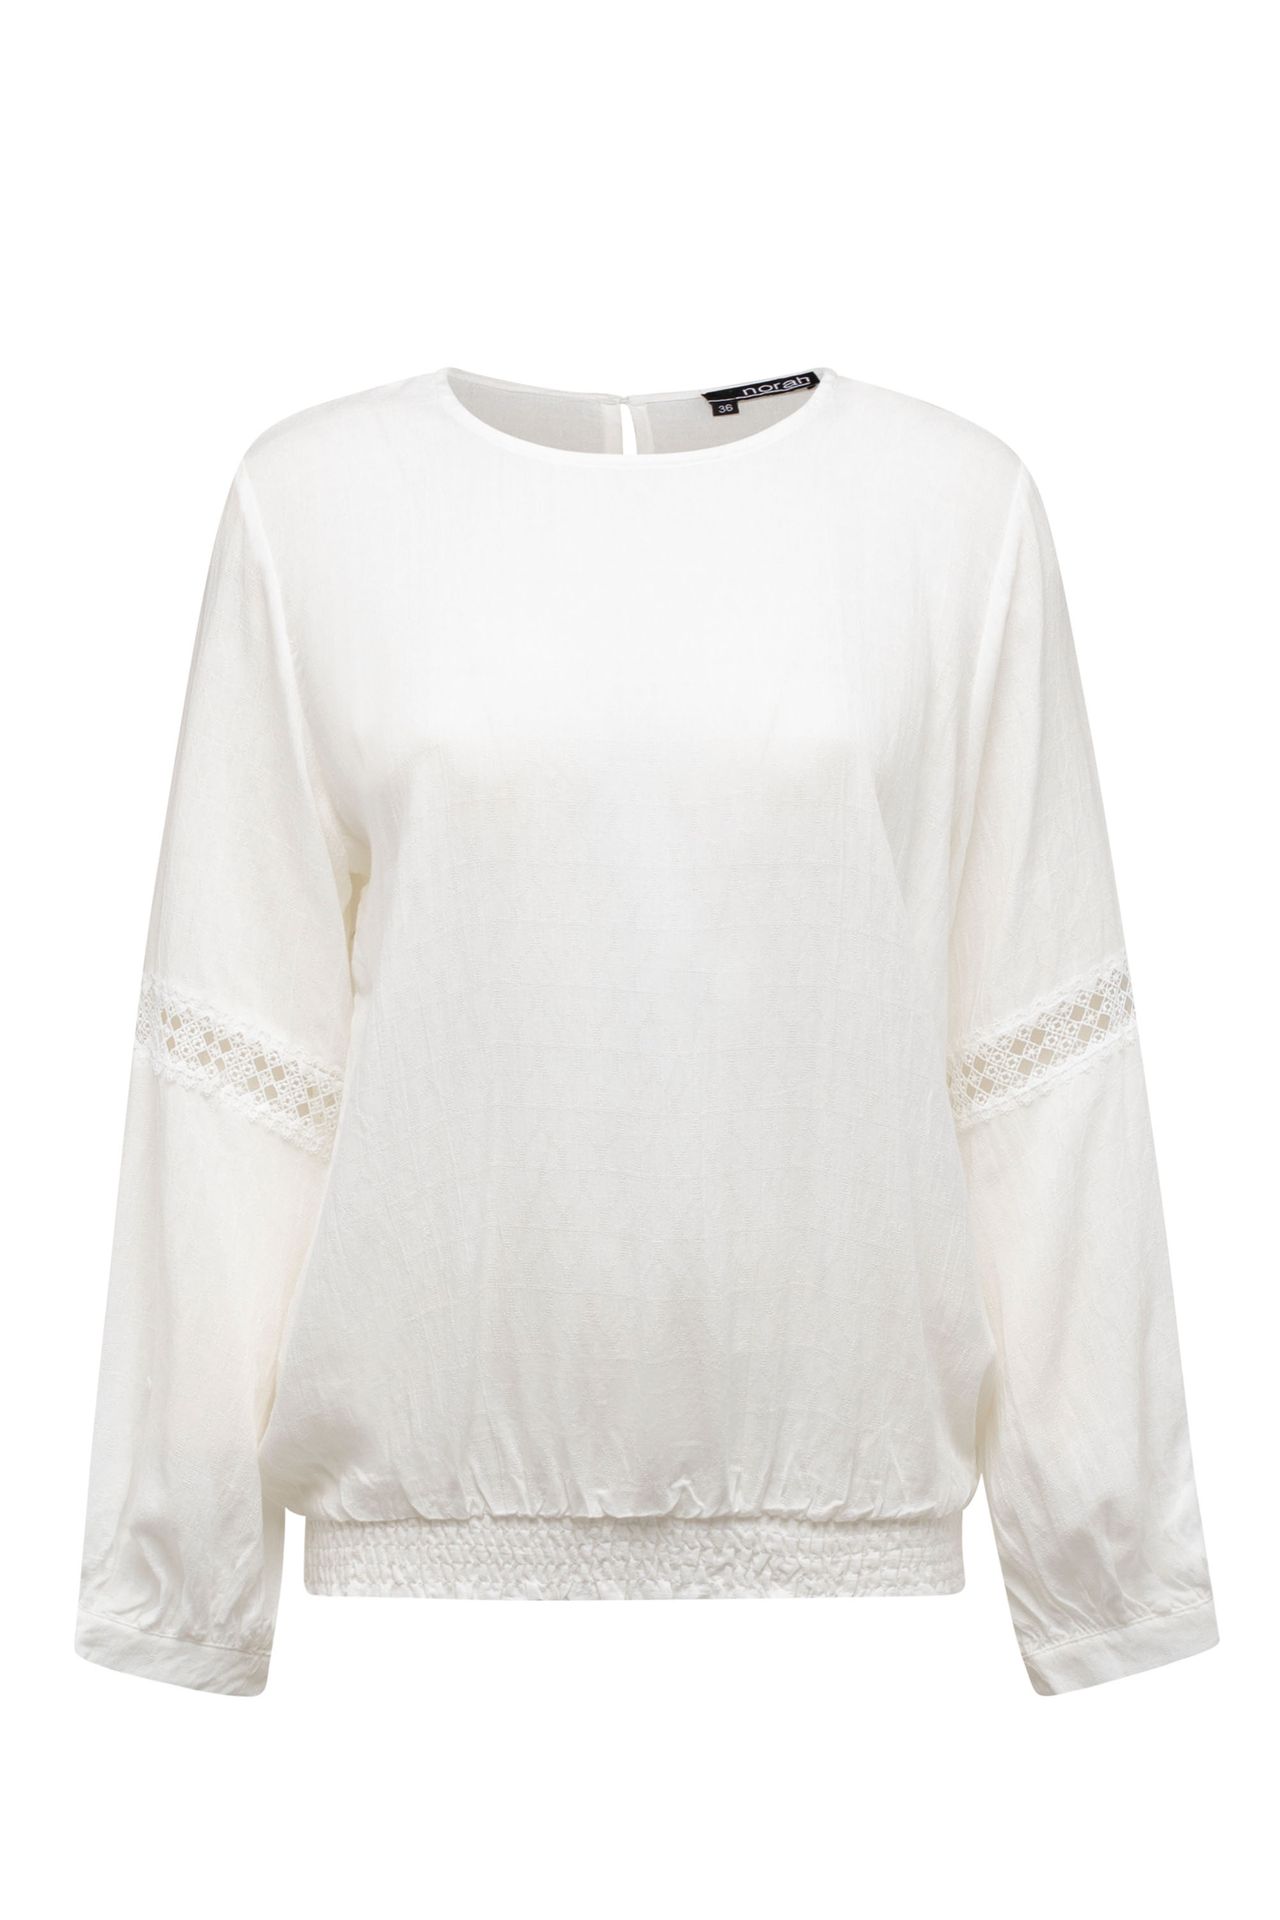  Blouse wit off-white 213342-101